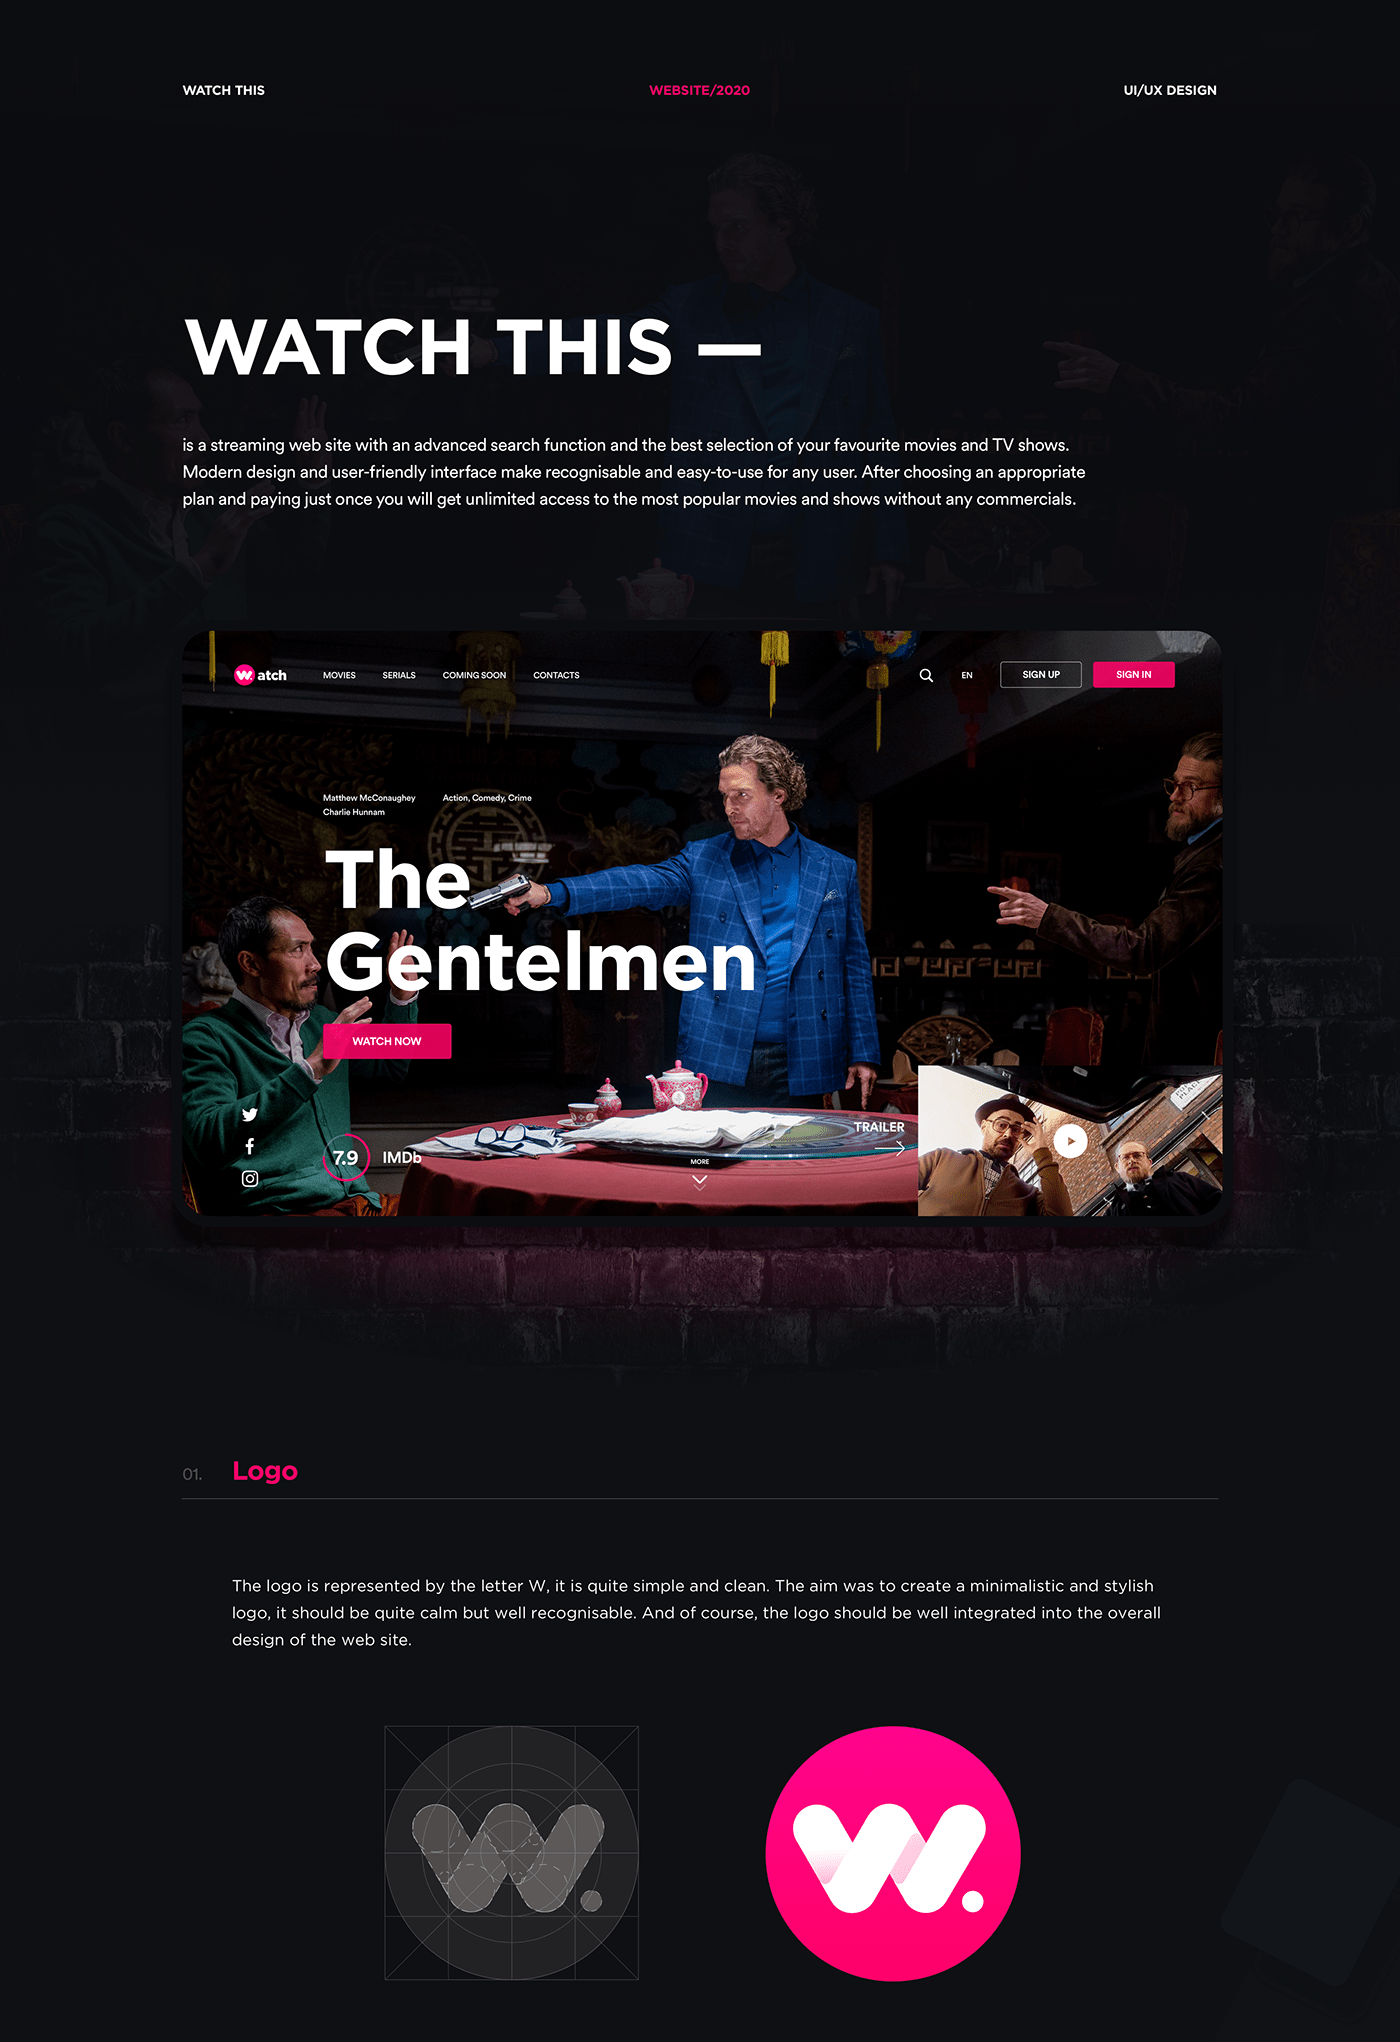 Hi guys! Today I want to represent you the design I've worked at last year for Watch This web site. 